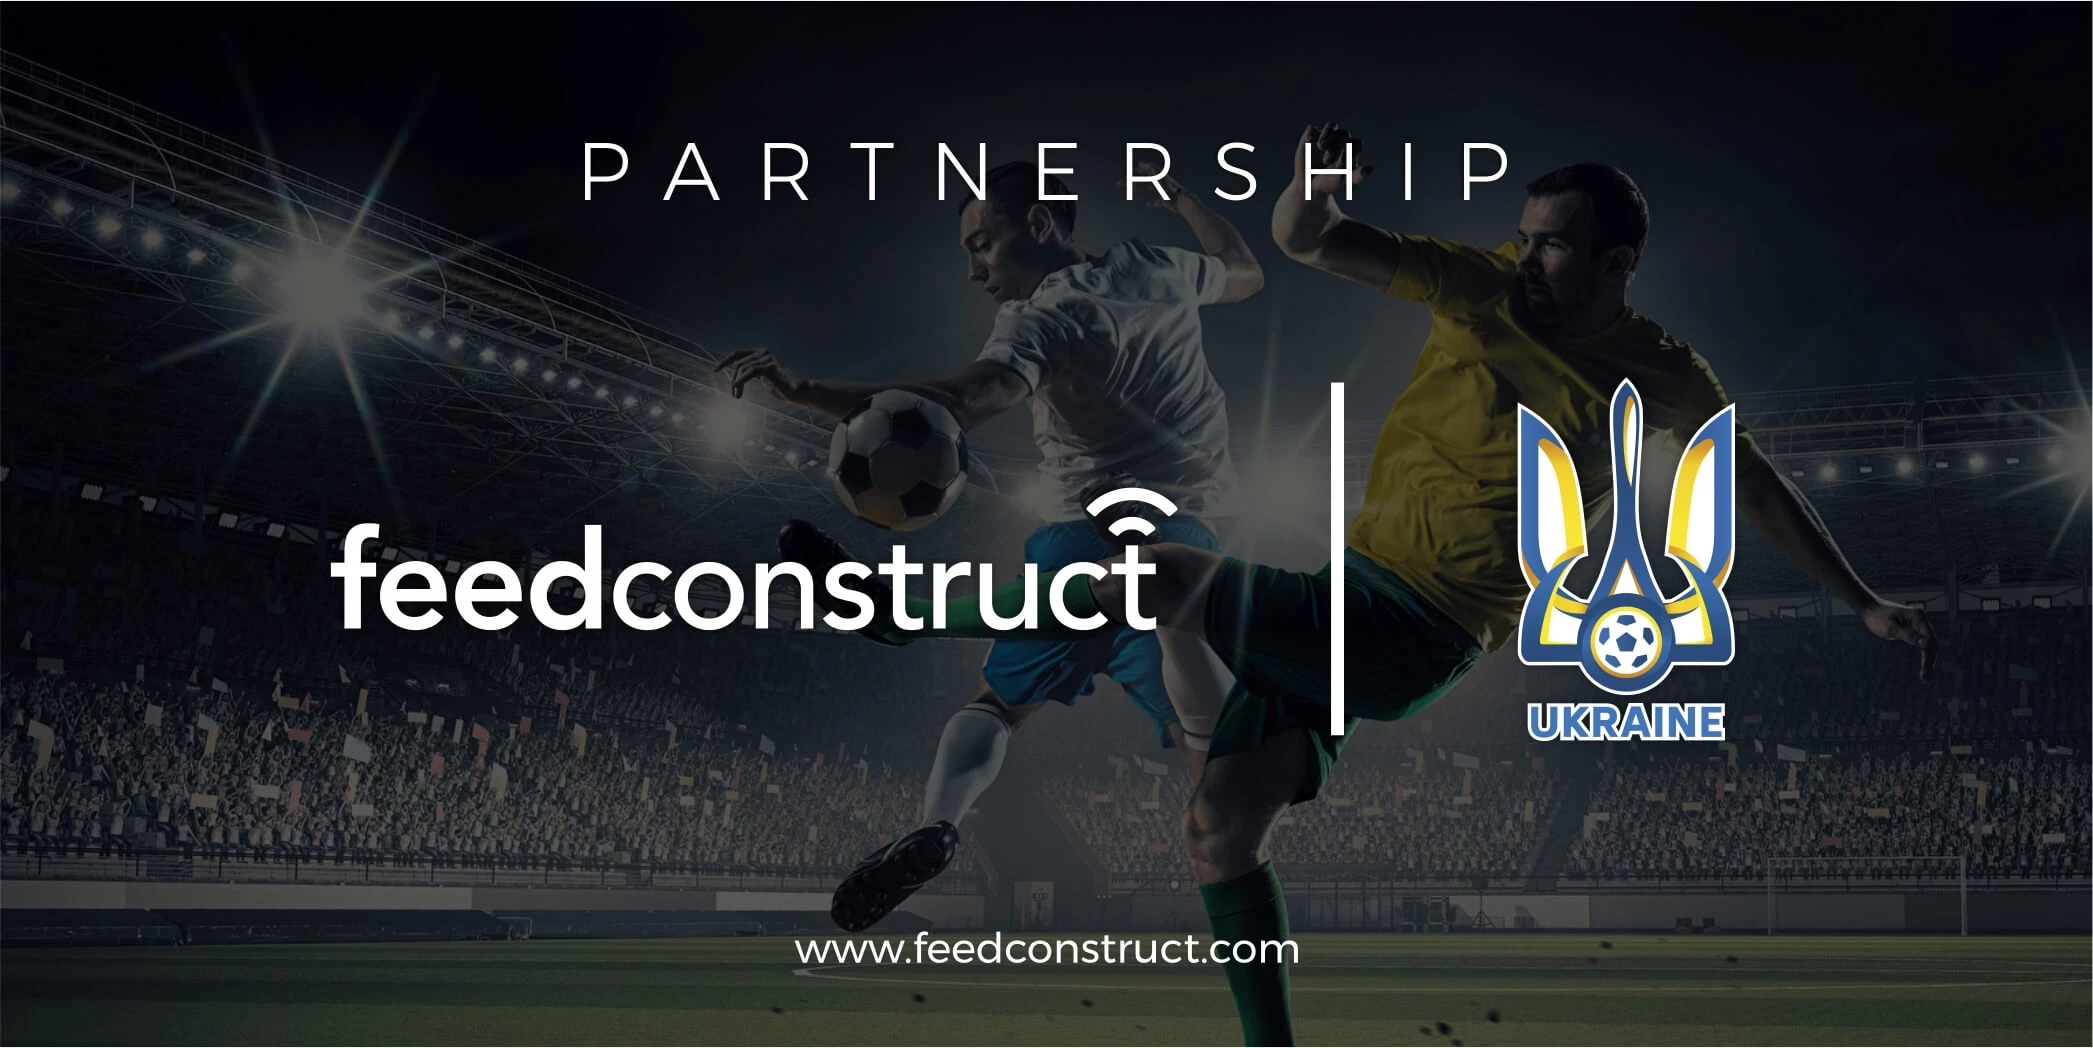 FeedConstruct signs deal on exclusive basis with The Ukrainian Association of Football